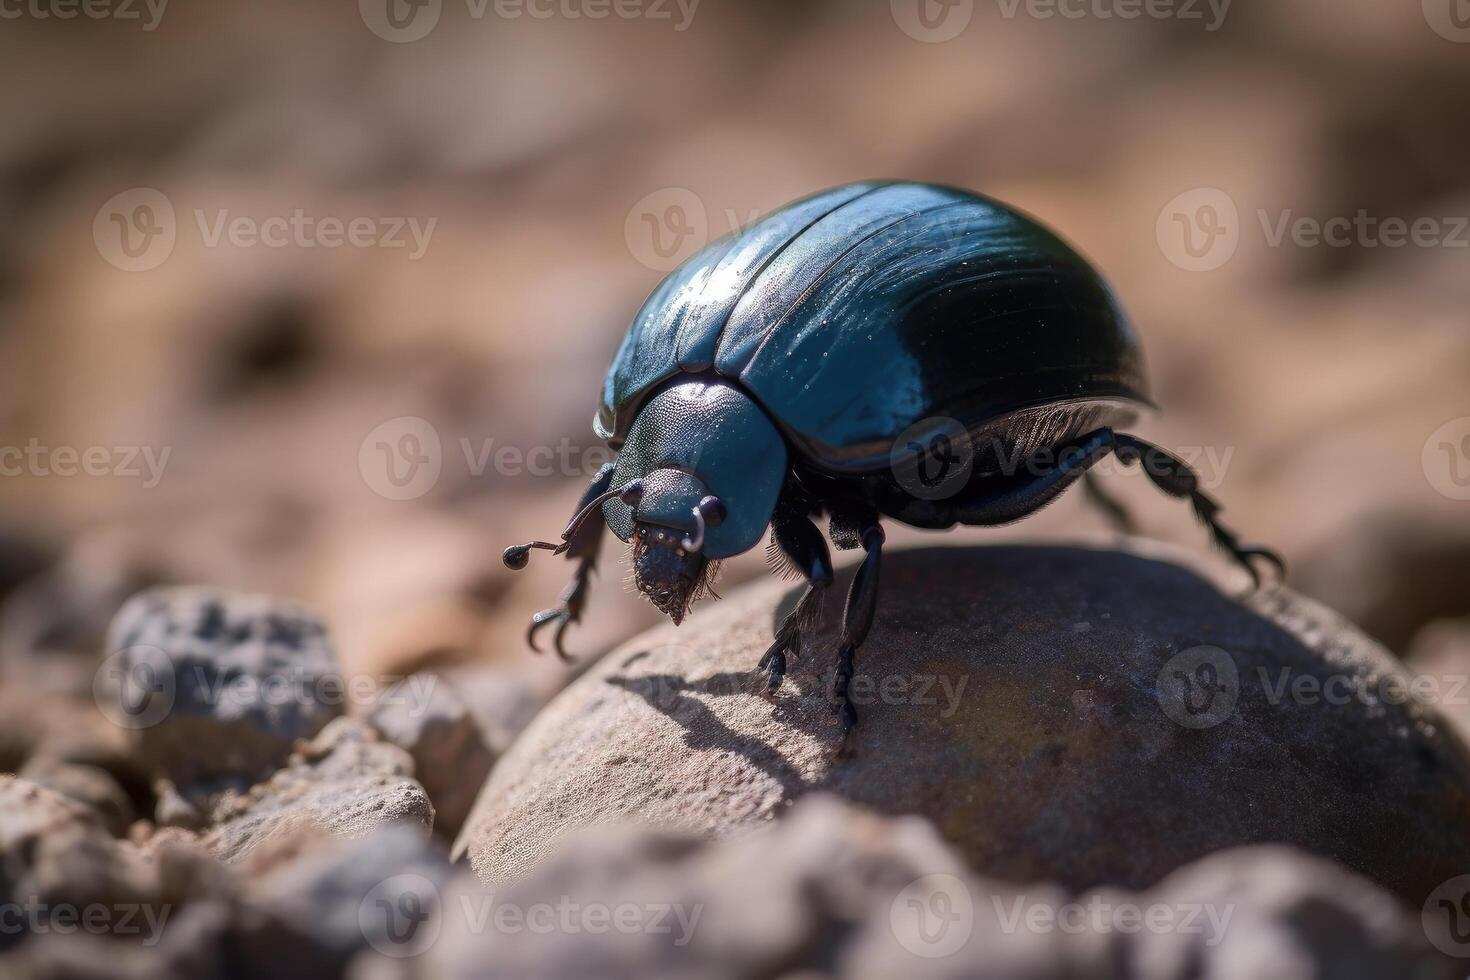 Dung beetle in a close up view created with technology. photo